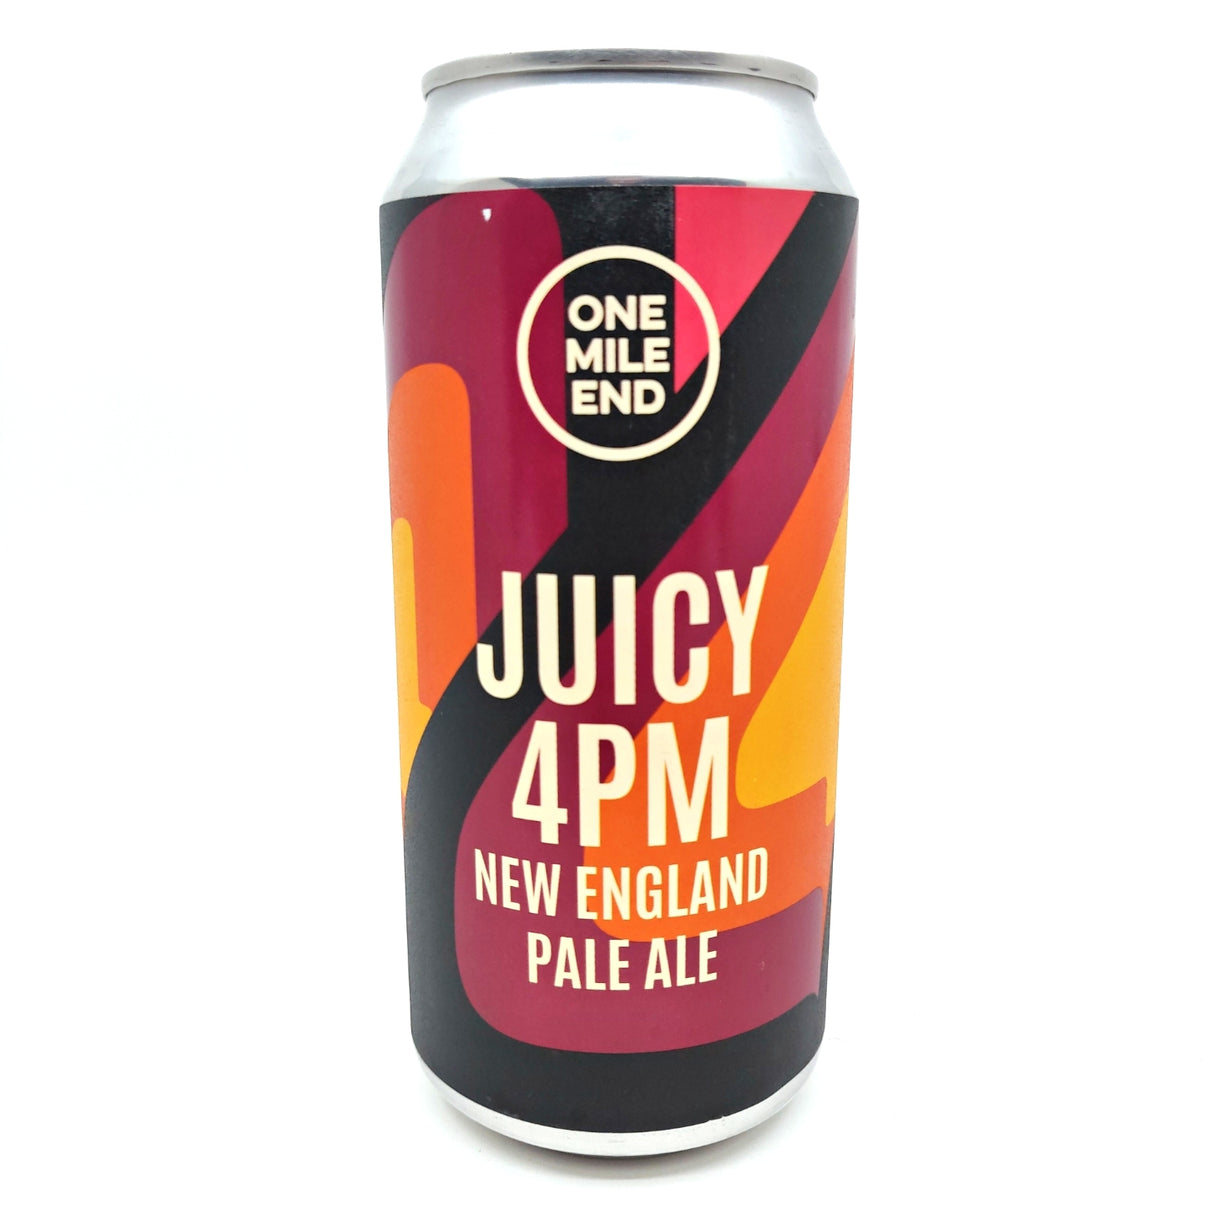 One Mile End Juicy 4pm New England Pale Ale 4.9% (440ml can)-Hop Burns & Black